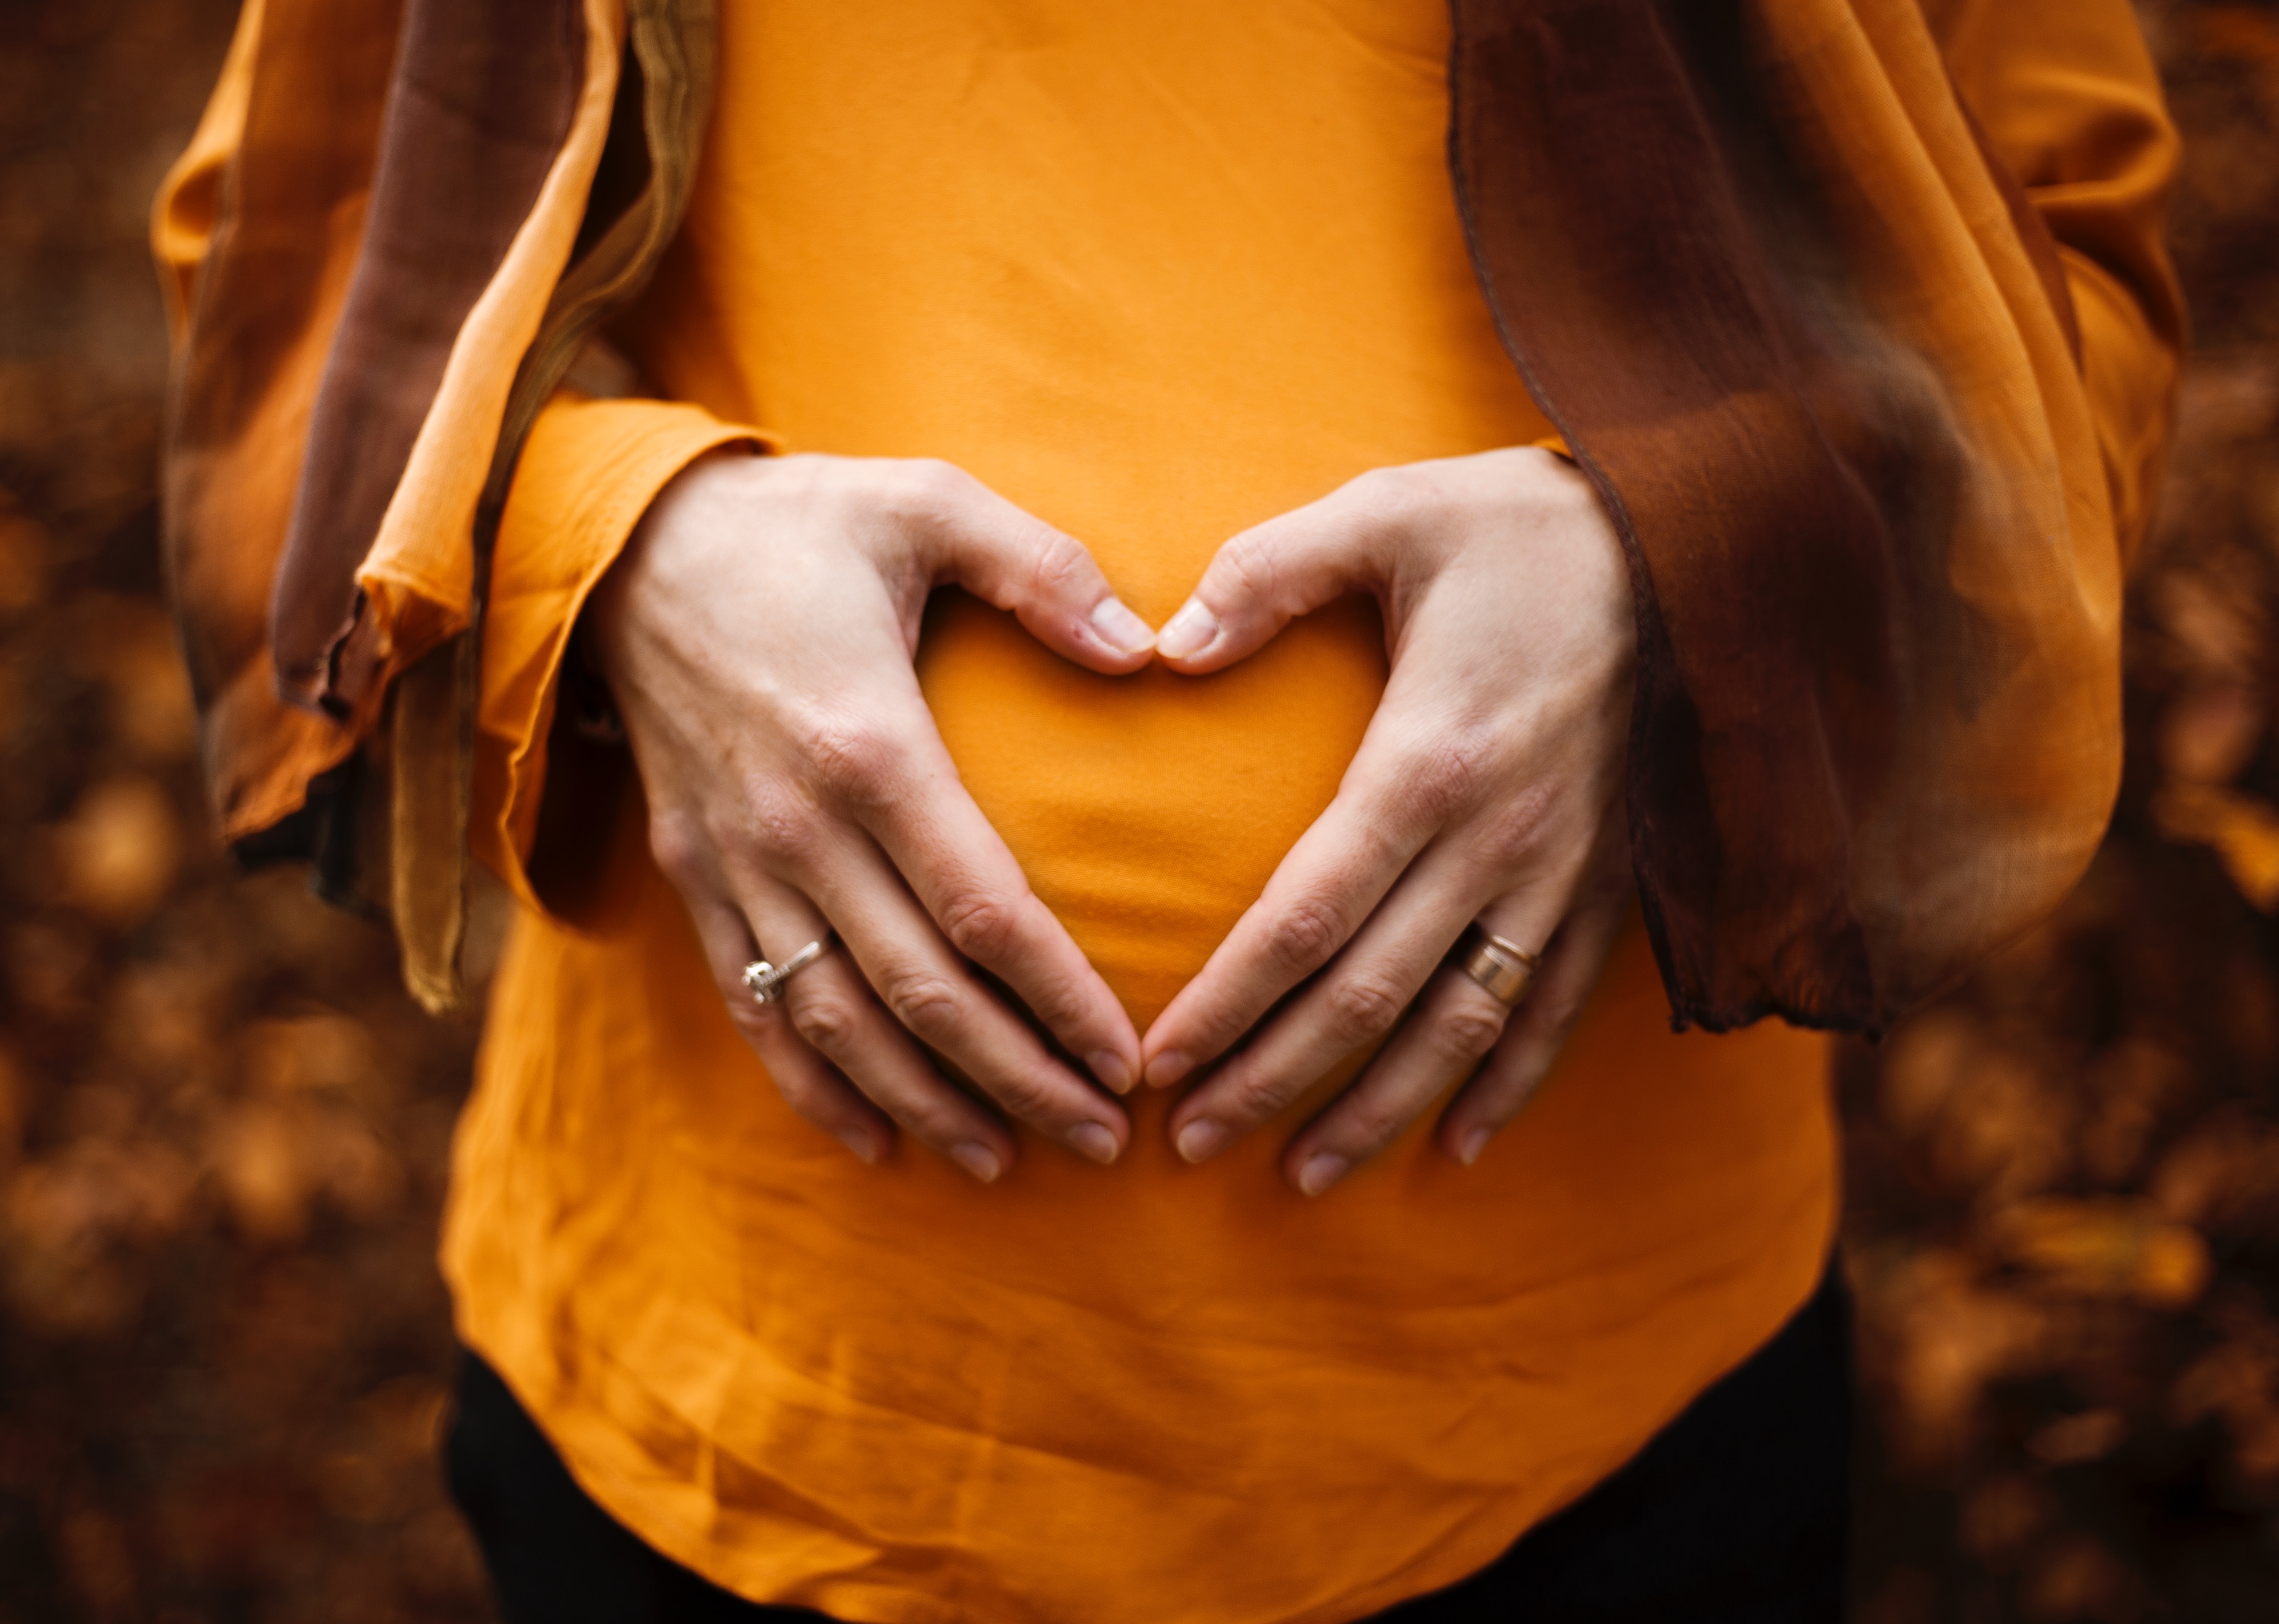 Facing an unplanned pregnancy can be tough. Here is a list of the basic things expectant parents need to know when facing one.